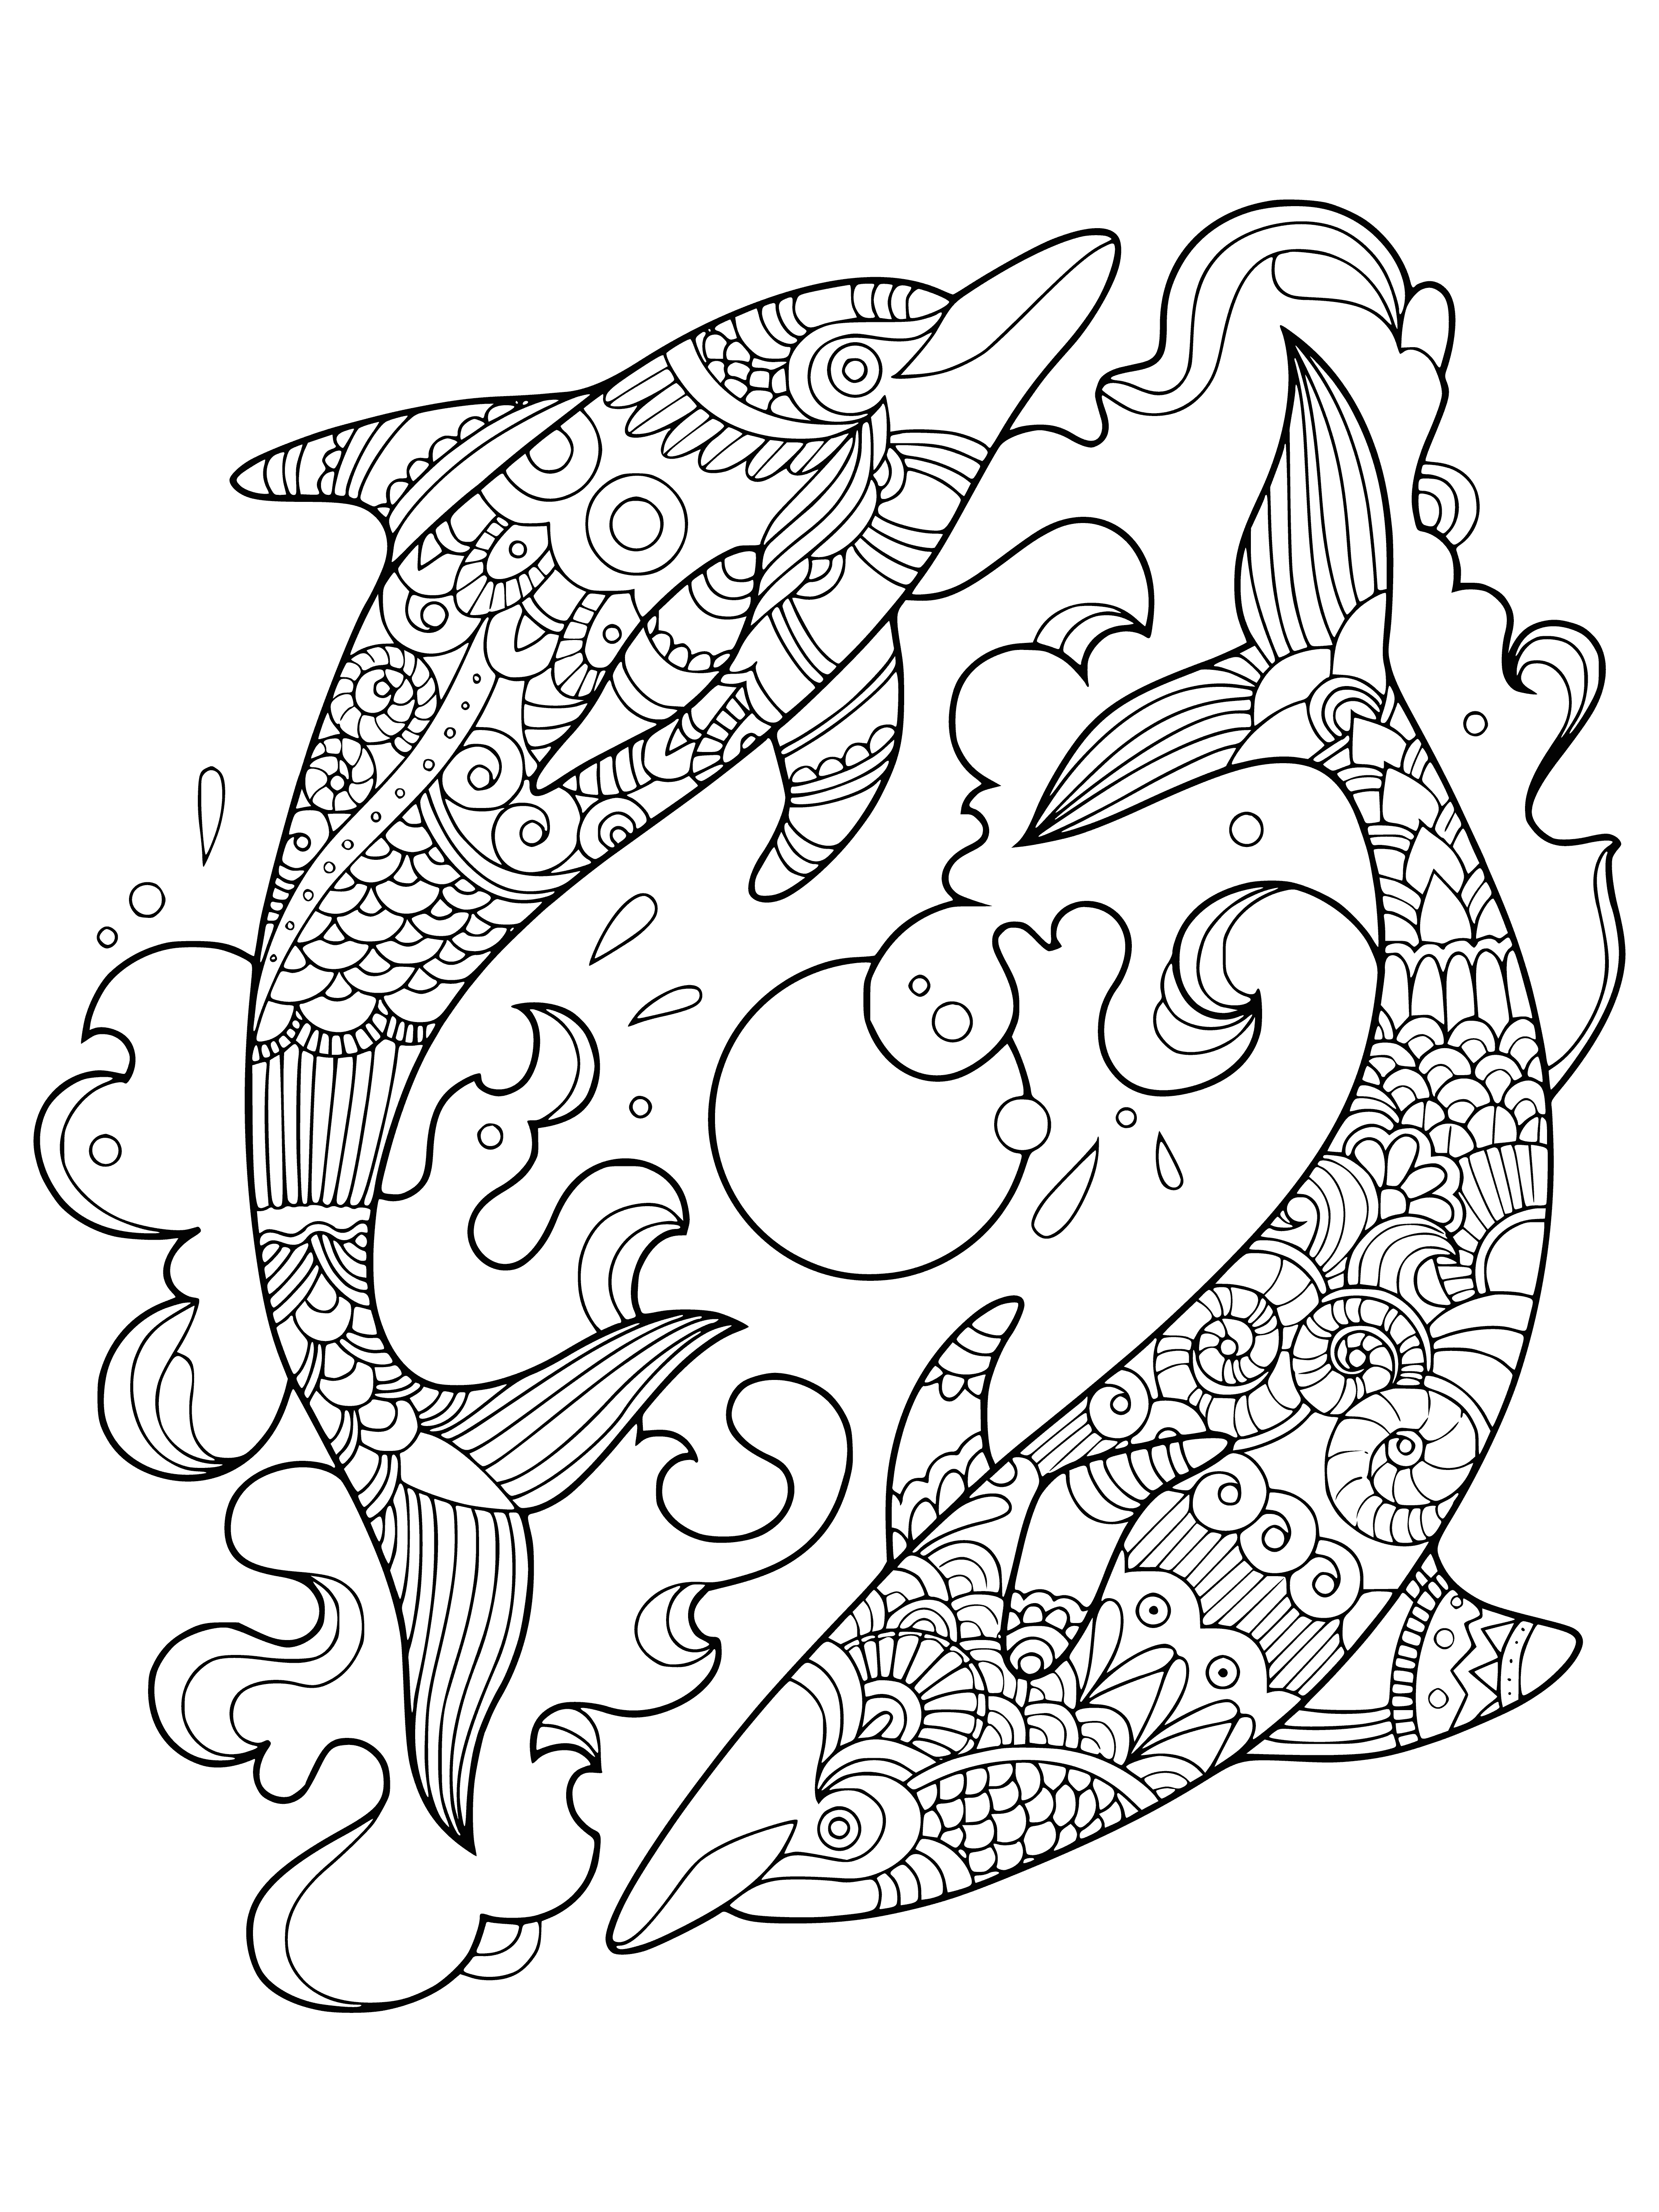 coloring page: Pod of dolphins swimming in the deep blue sea, bodies gleaming in the sunlight and looking peaceful.